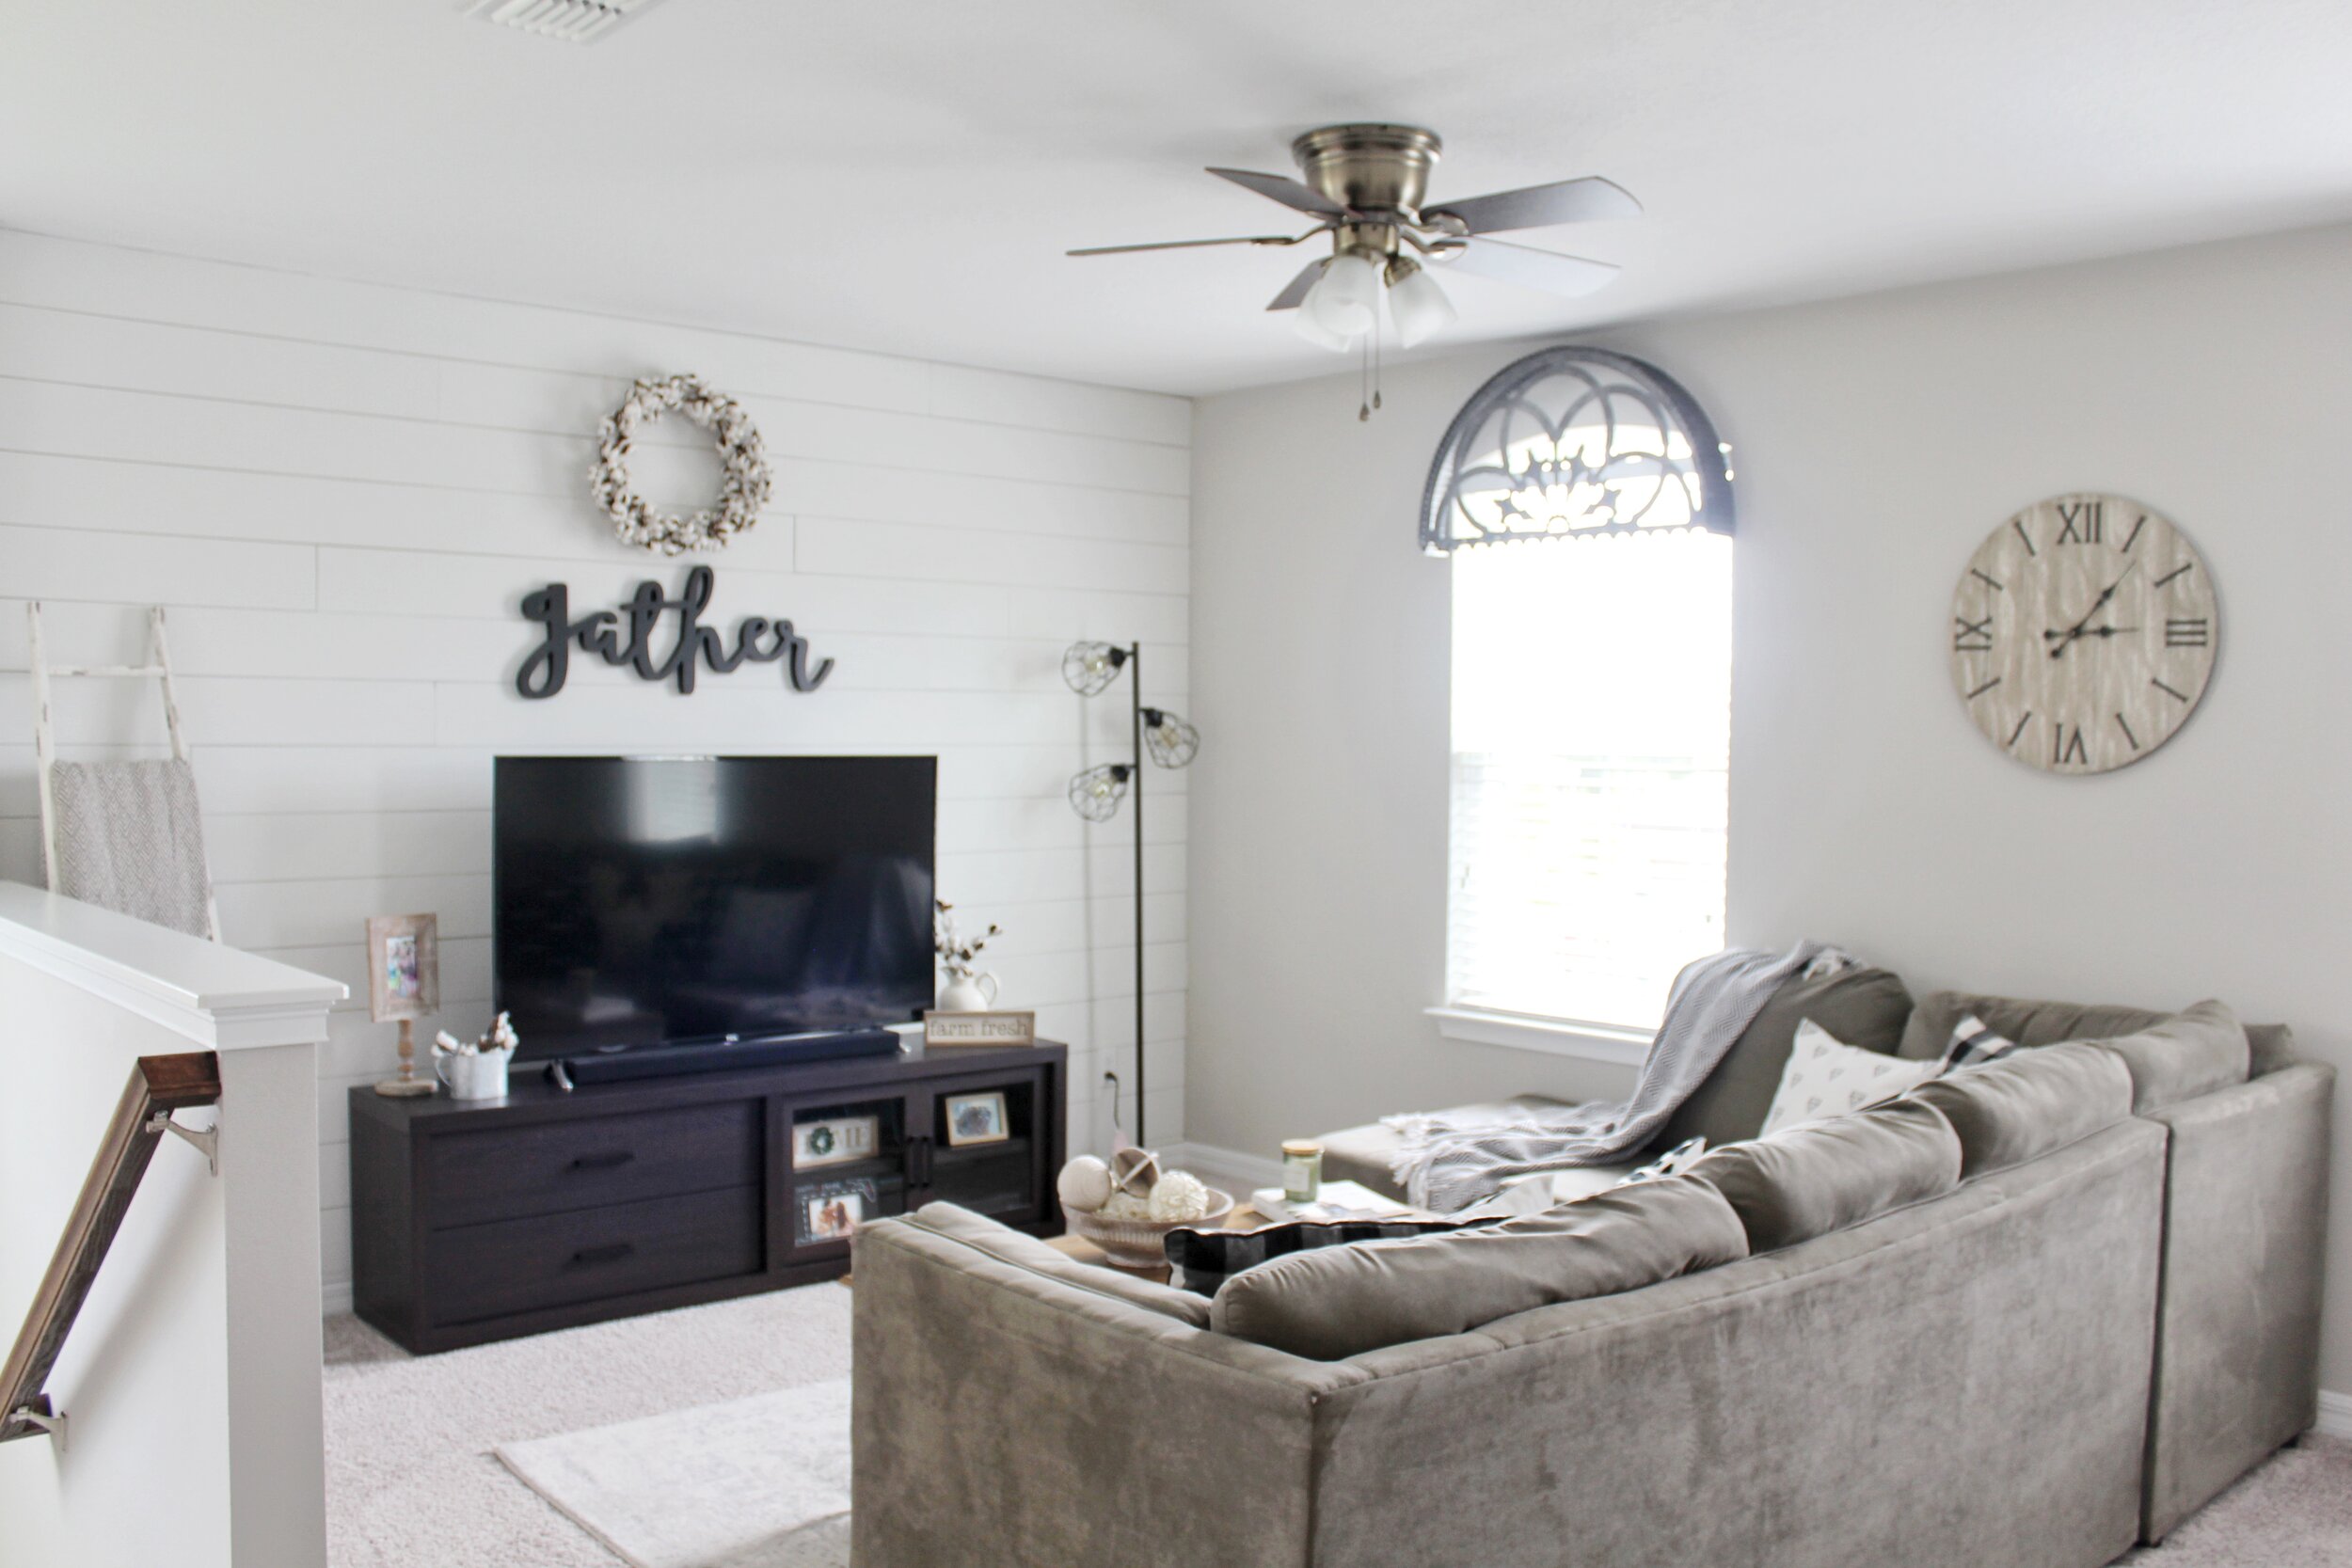 Check out that old fan, and all the farmhouse vibes!